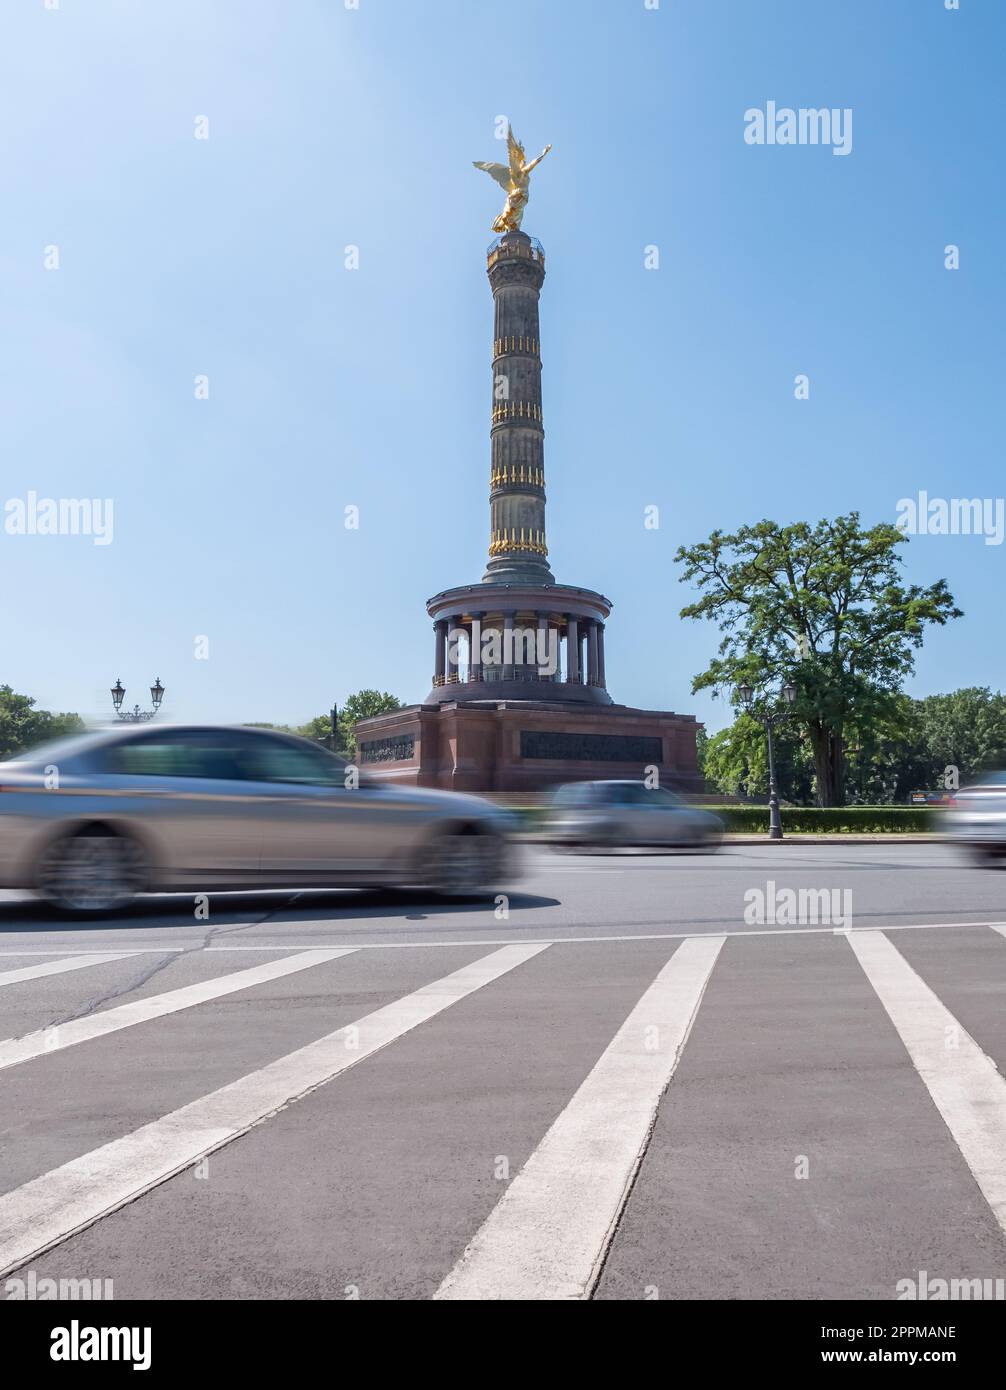 Victory column, Berlin, Germany during summer with clear sky, traffic in front, no people, long exposure, view from low angle Stock Photo